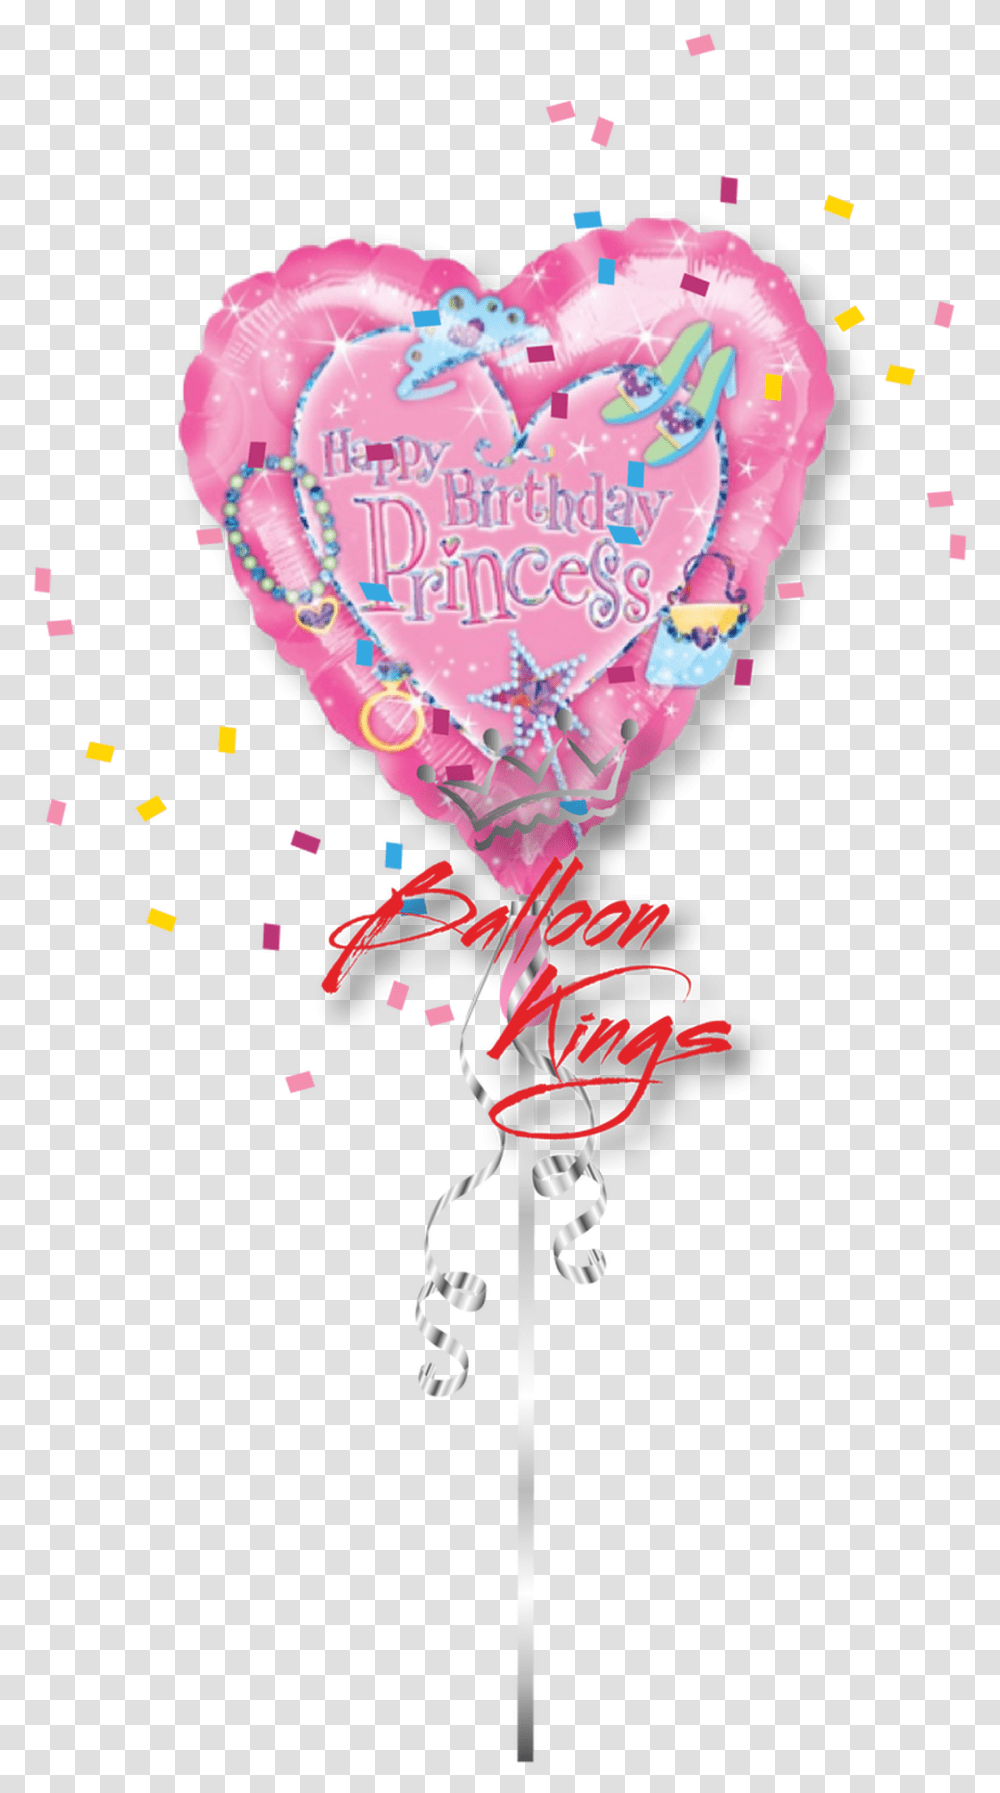 Happy Birthday Princess Balloon, Paper, Confetti, Food, Dating Transparent Png